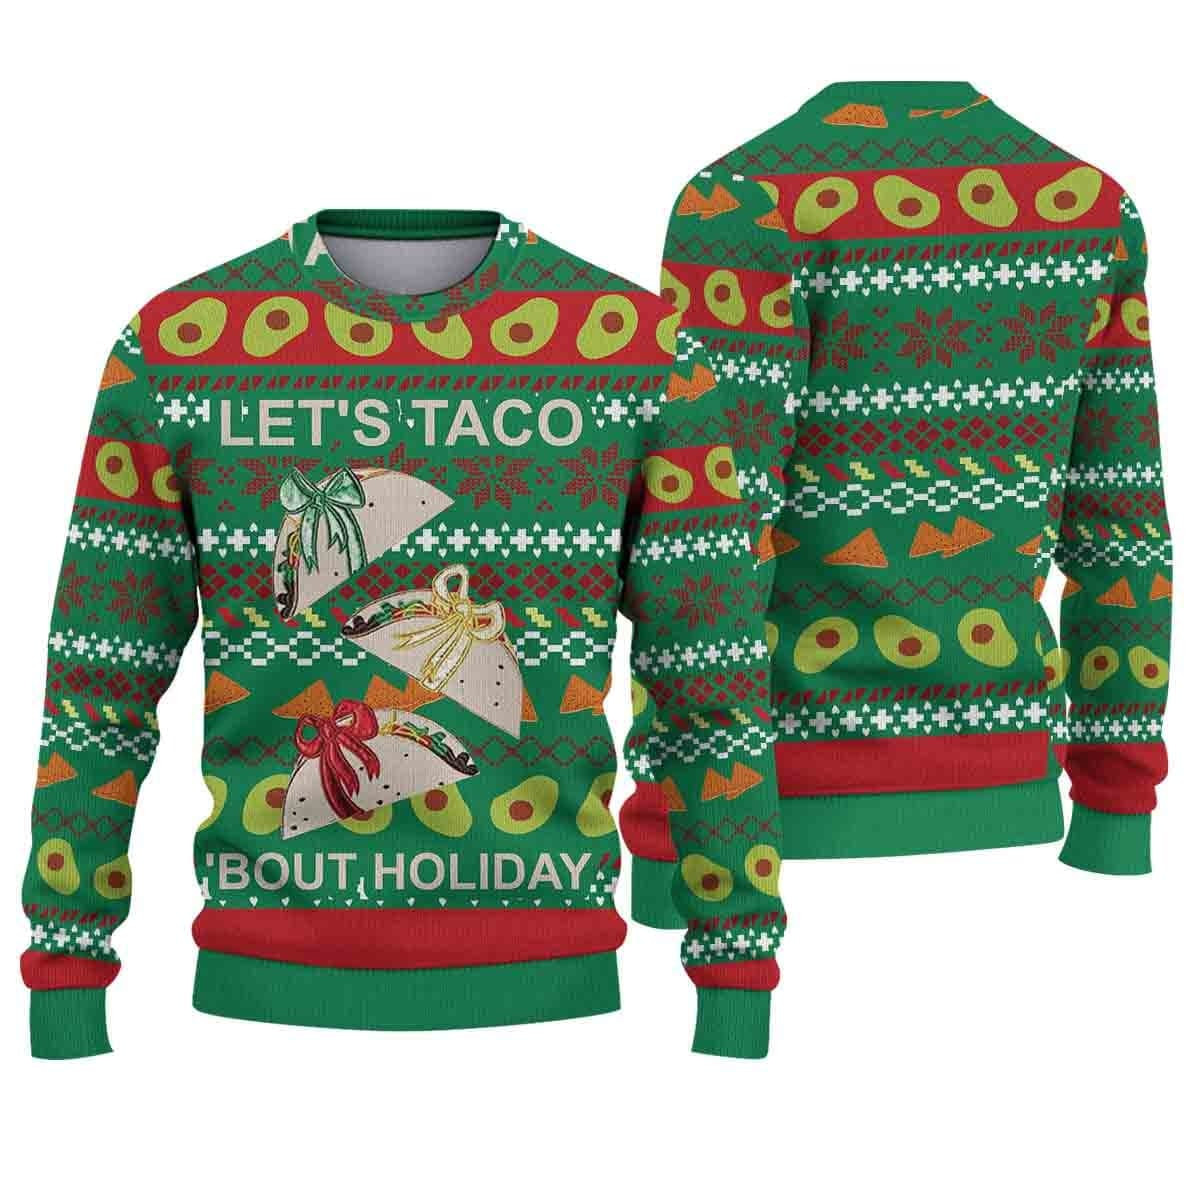 BUY NOW TOP UGLY CHRISTMAS SWEATER SO HOT IN HOLIDAY 51